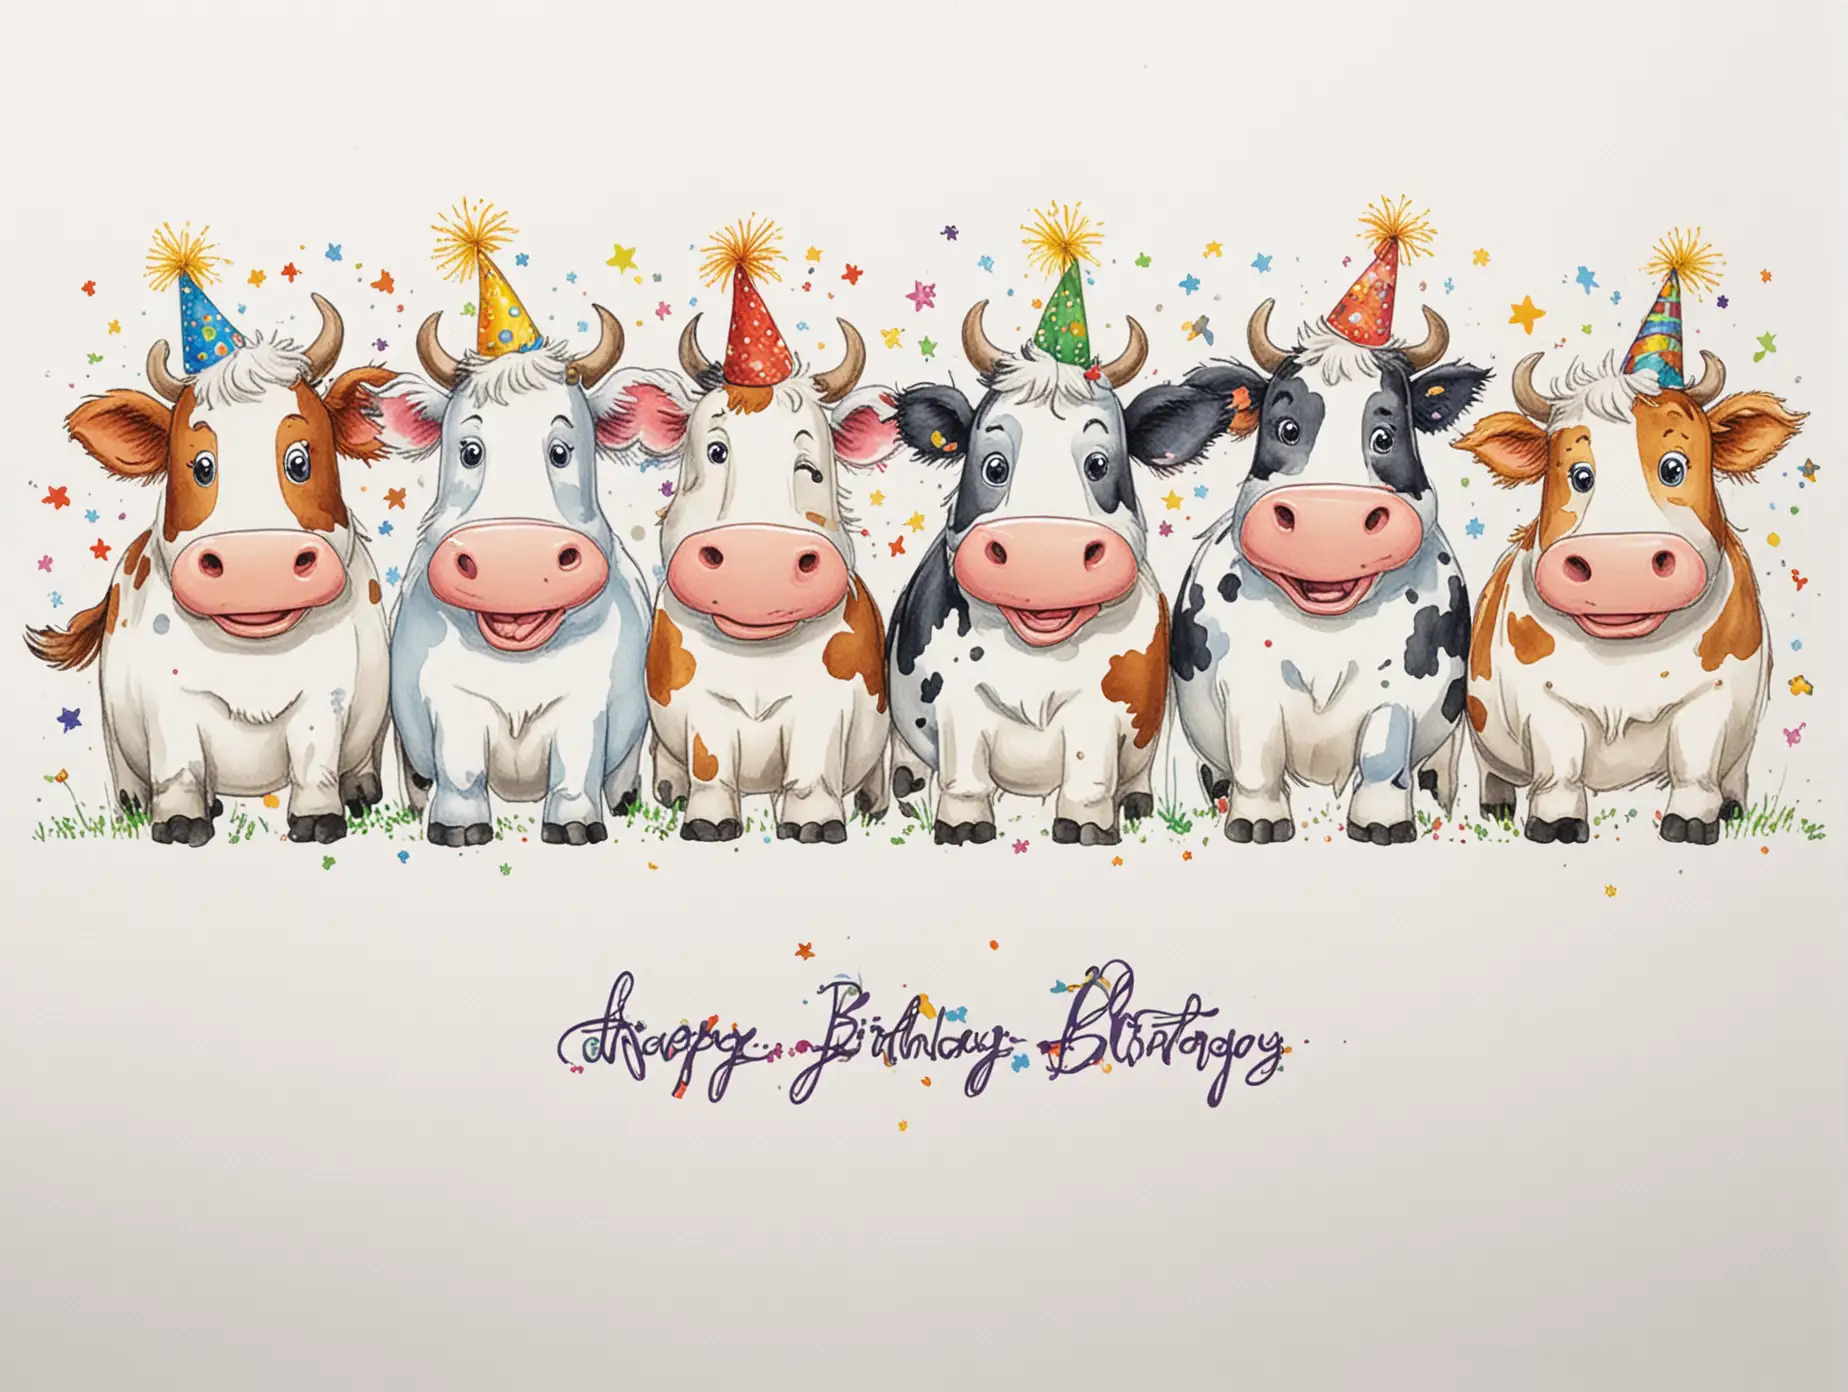 multicolour cows cartoon design, "HAPPY BIRTHDAY" in writing at the top, pure white background